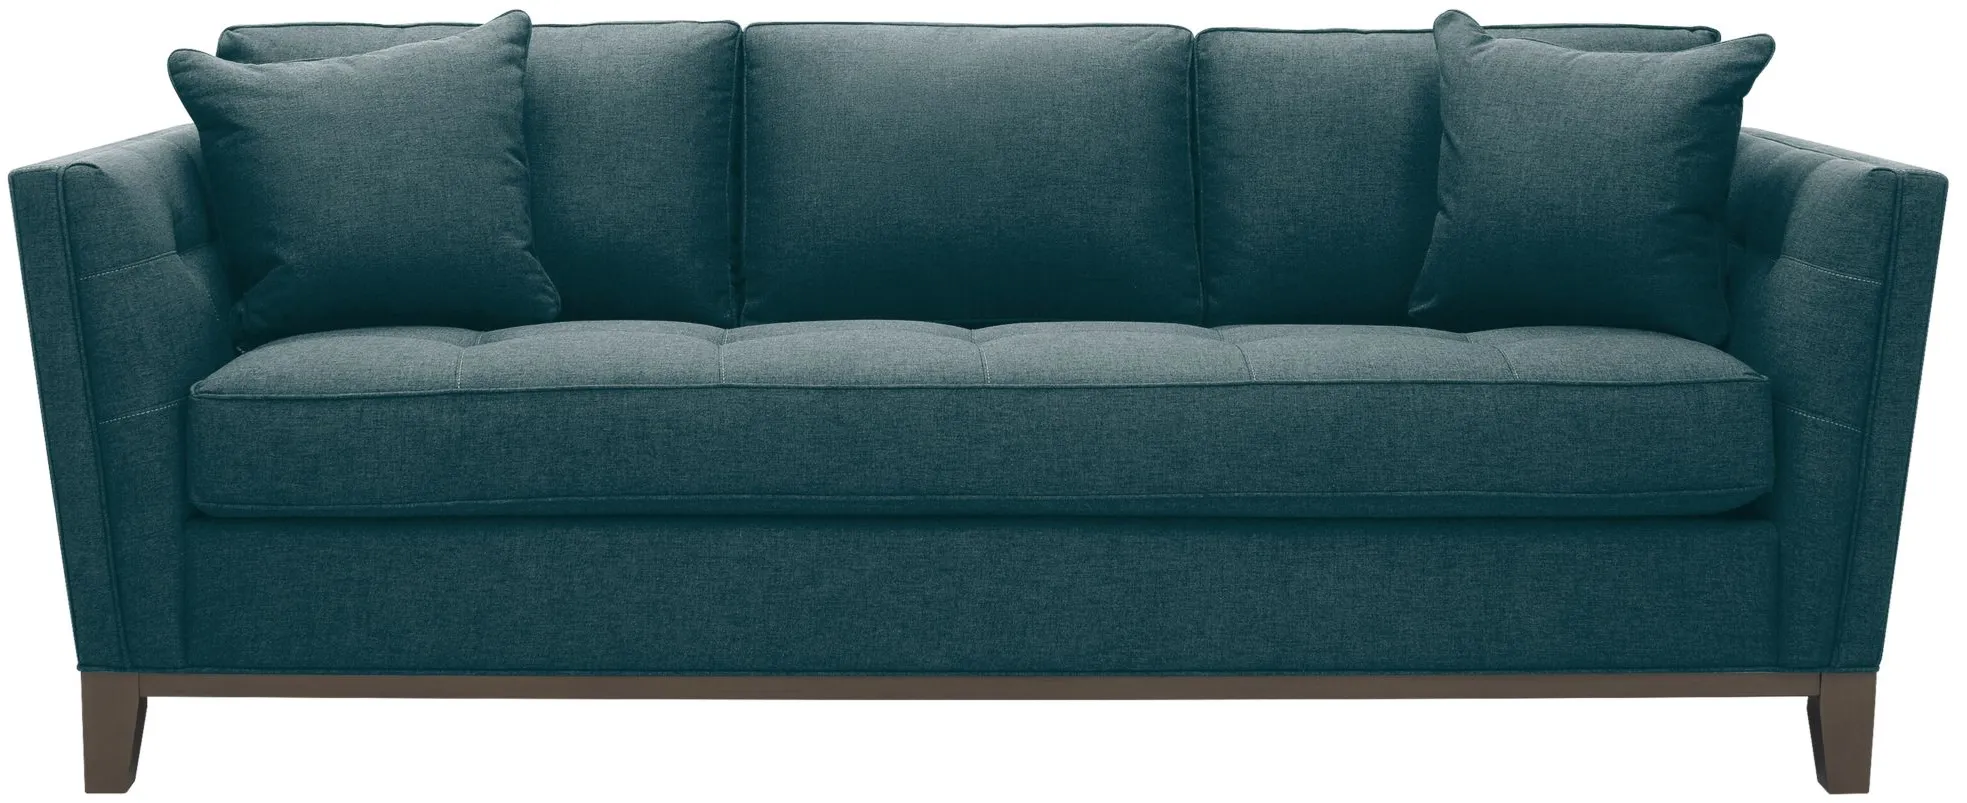 Macauley Sofa in Suede So Soft Lagoon by H.M. Richards